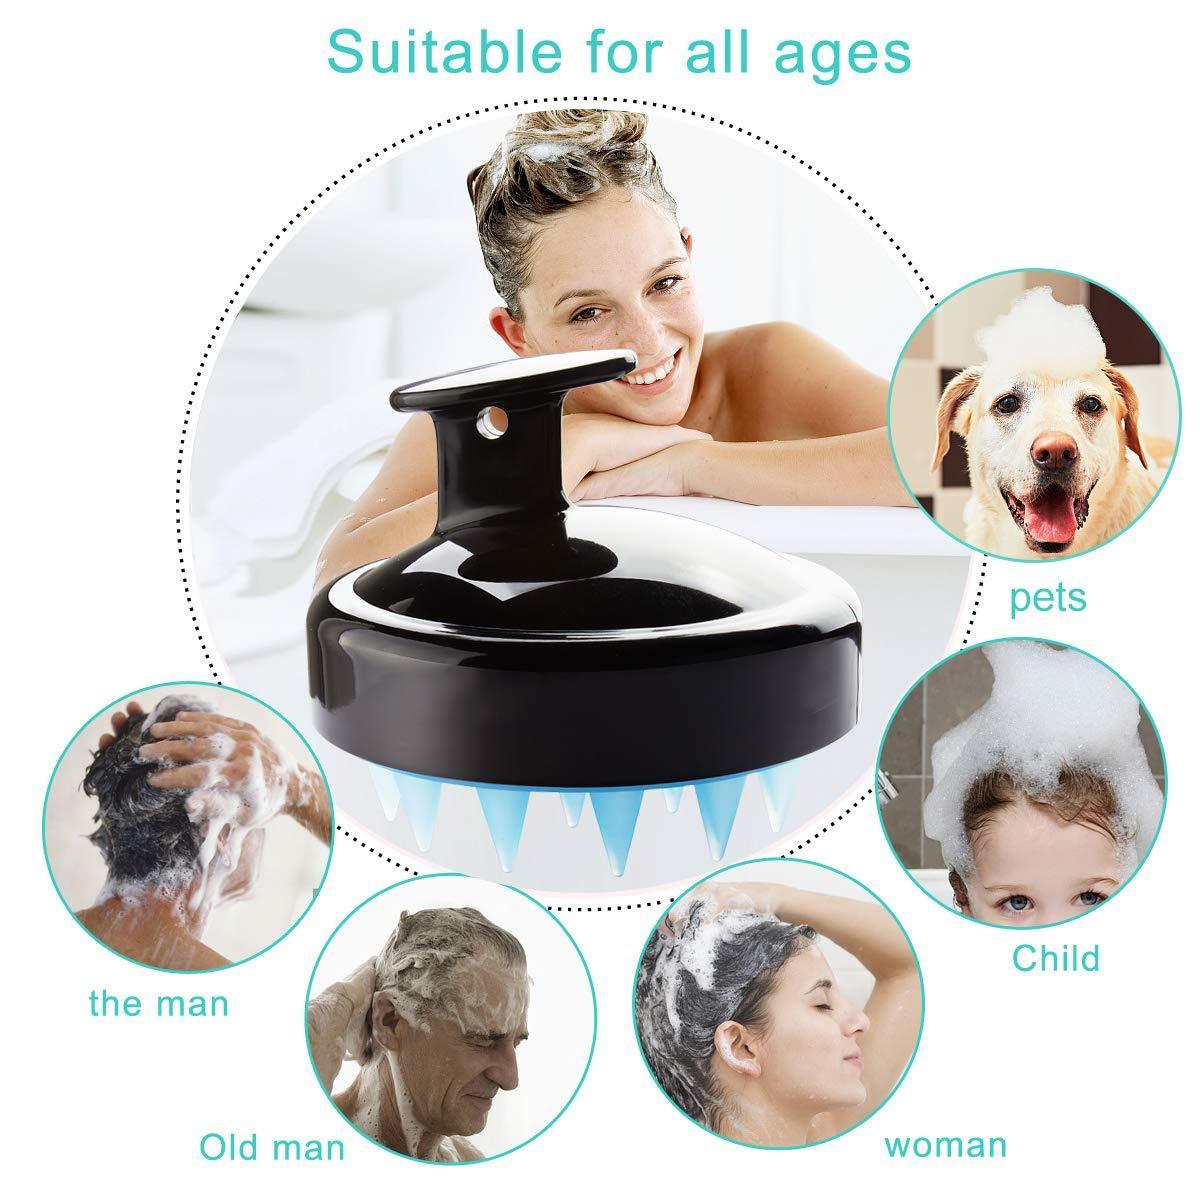 suitable for all ages